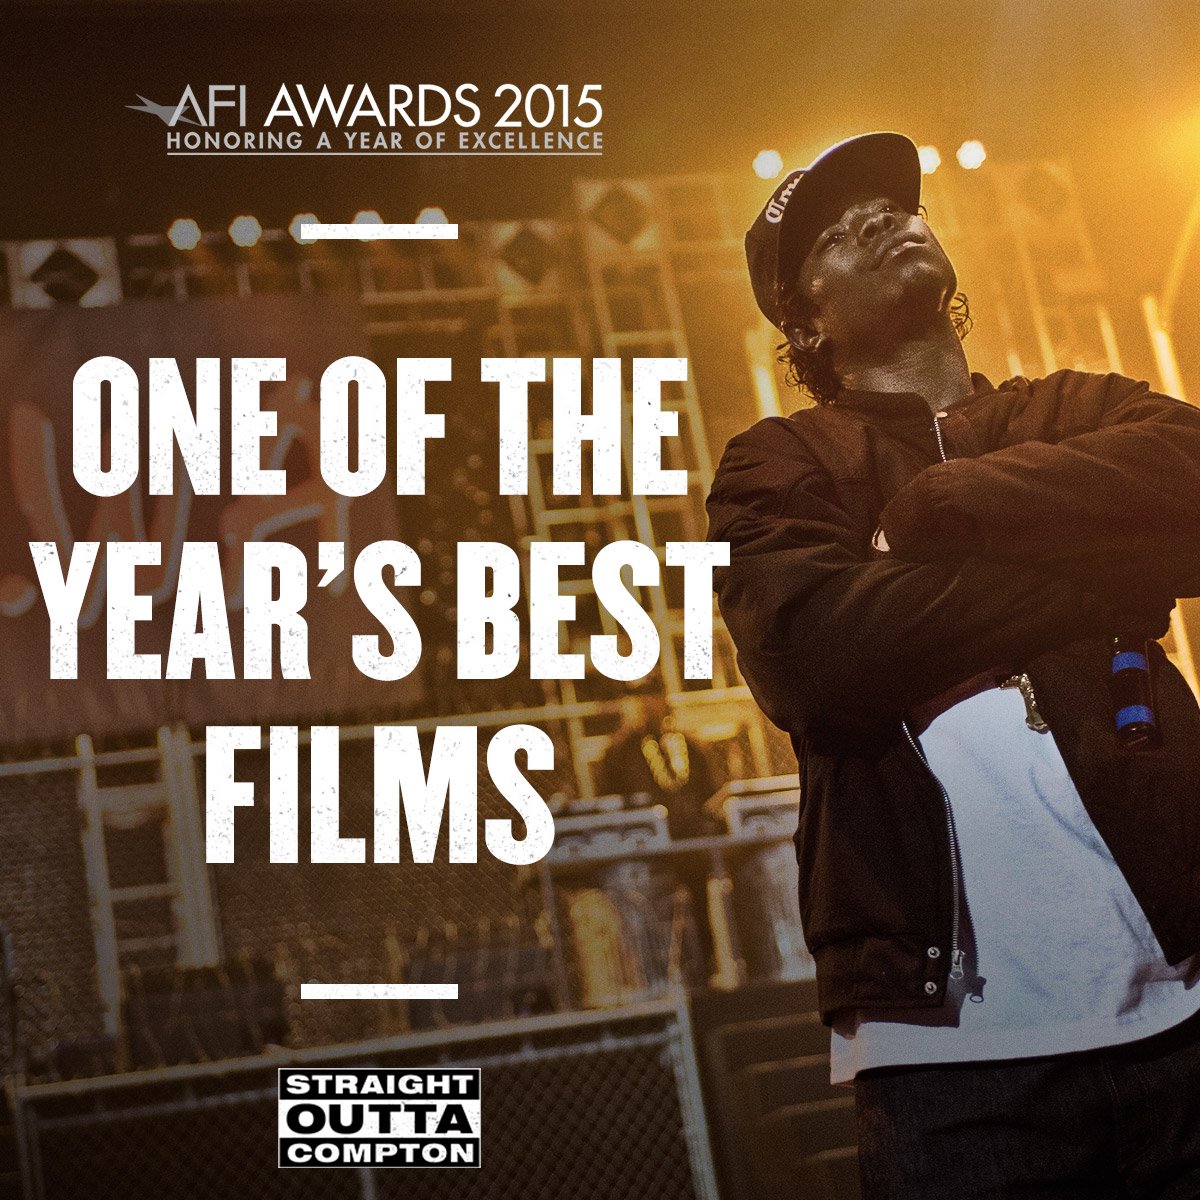 Honored that @AmericanFilm voted #StraightOuttaCompton as one of the year's best films! #AFIAwards https://t.co/TZnrXoVxwf